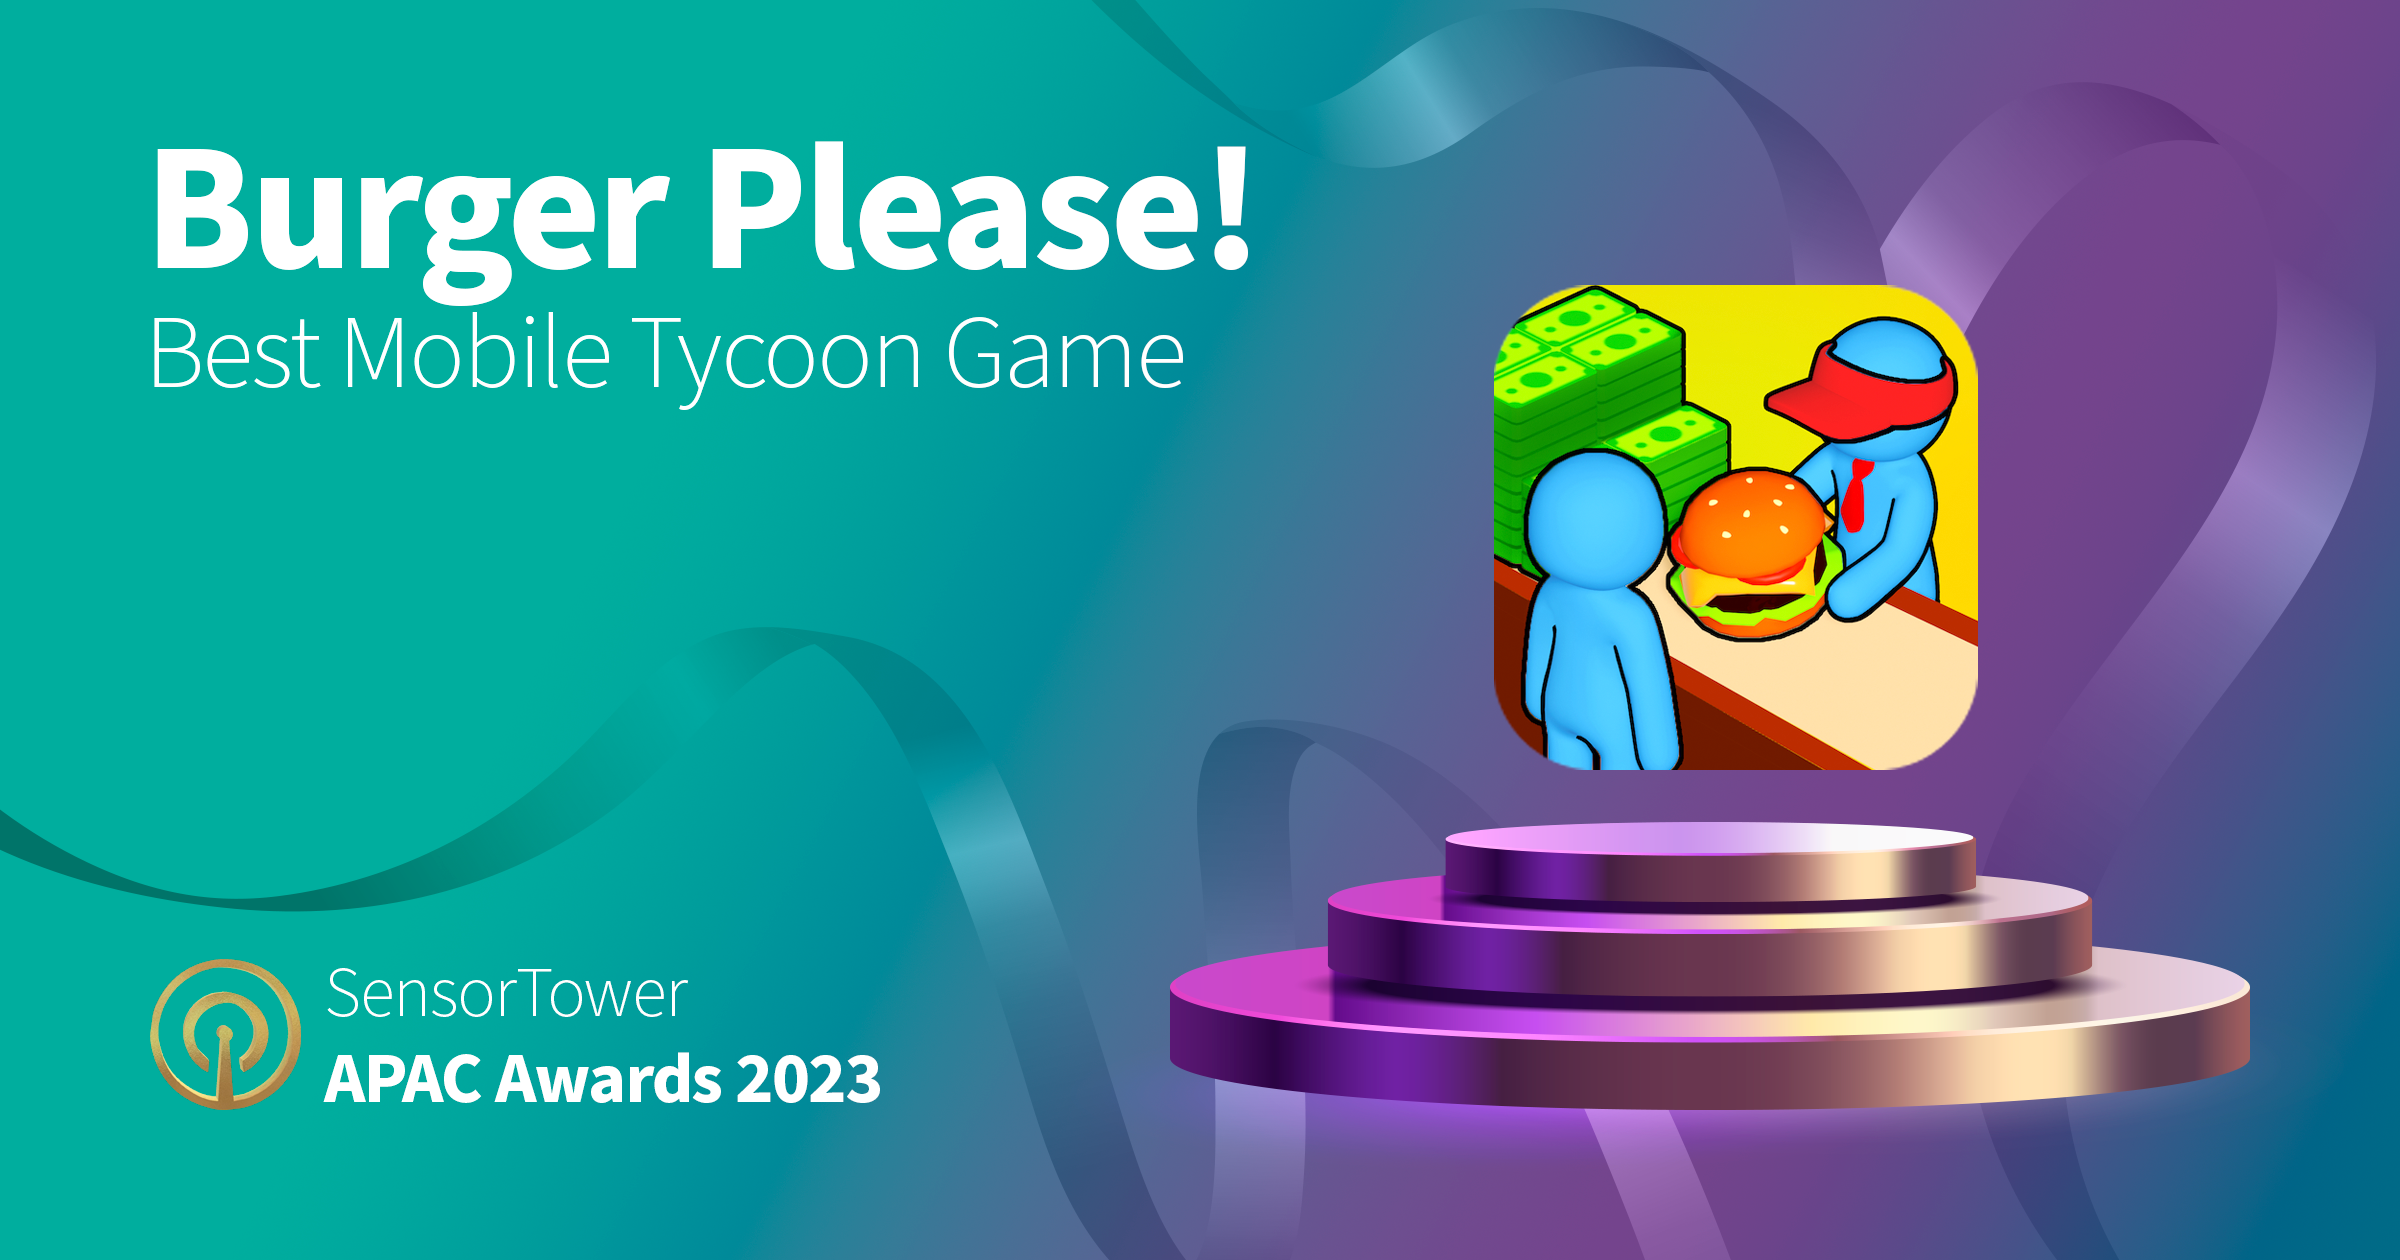 Burger Please (Best Mobile Tycoon Game)